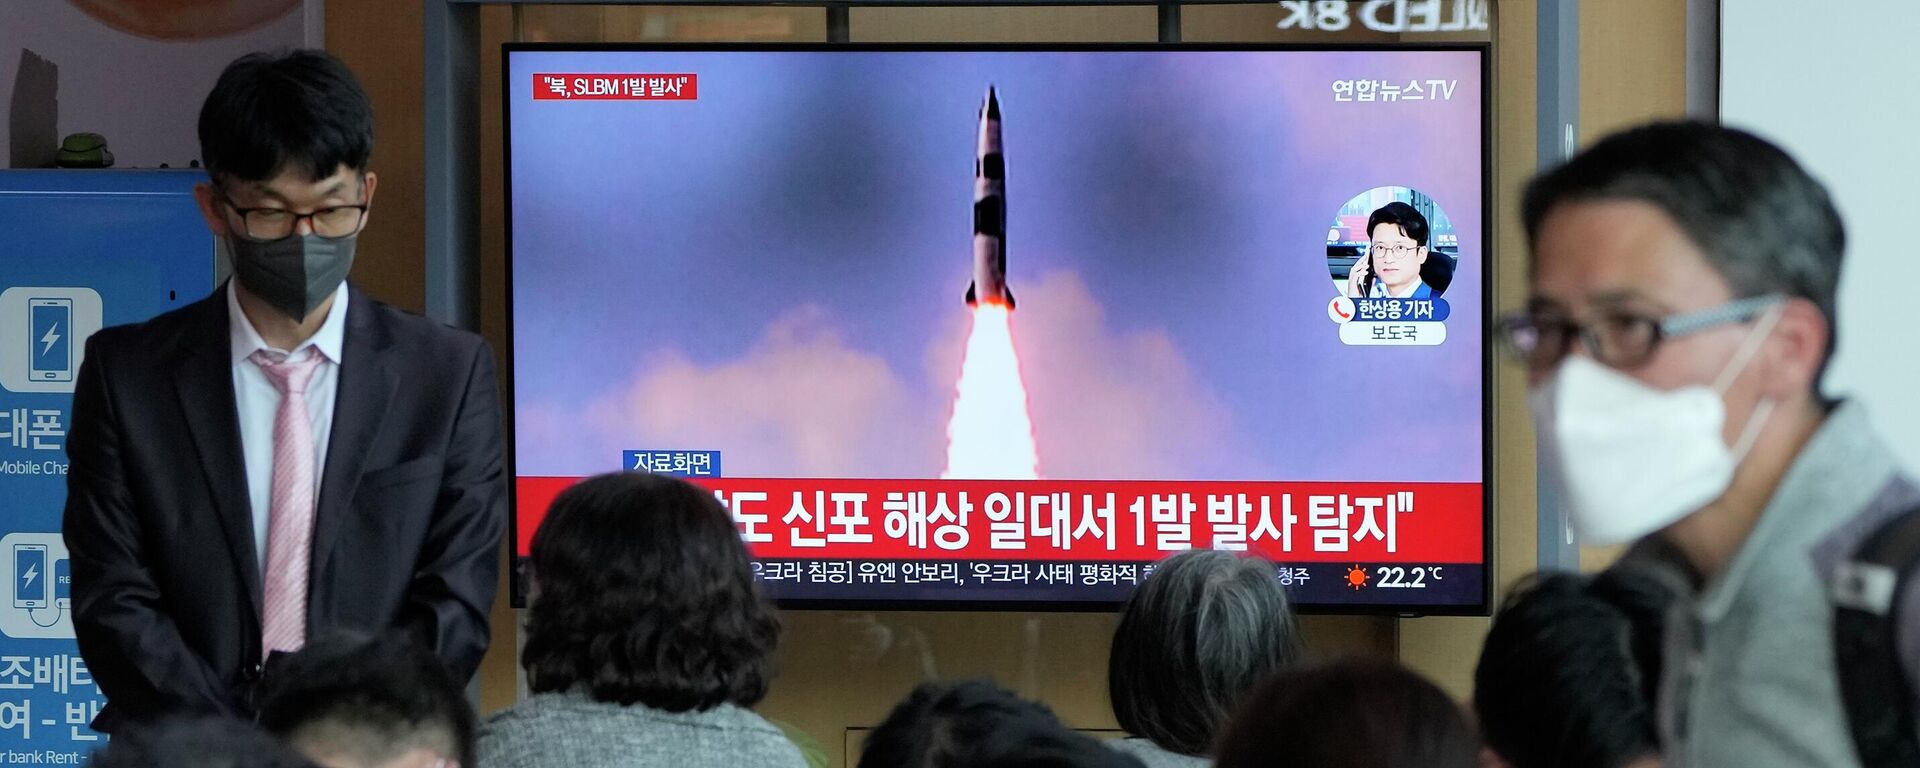 People watch a TV showing a file image of North Korea's missile launch during a news program at the Seoul Railway Station in Seoul, South Korea, Saturday, May 7, 2022. - Sputnik International, 1920, 07.05.2022